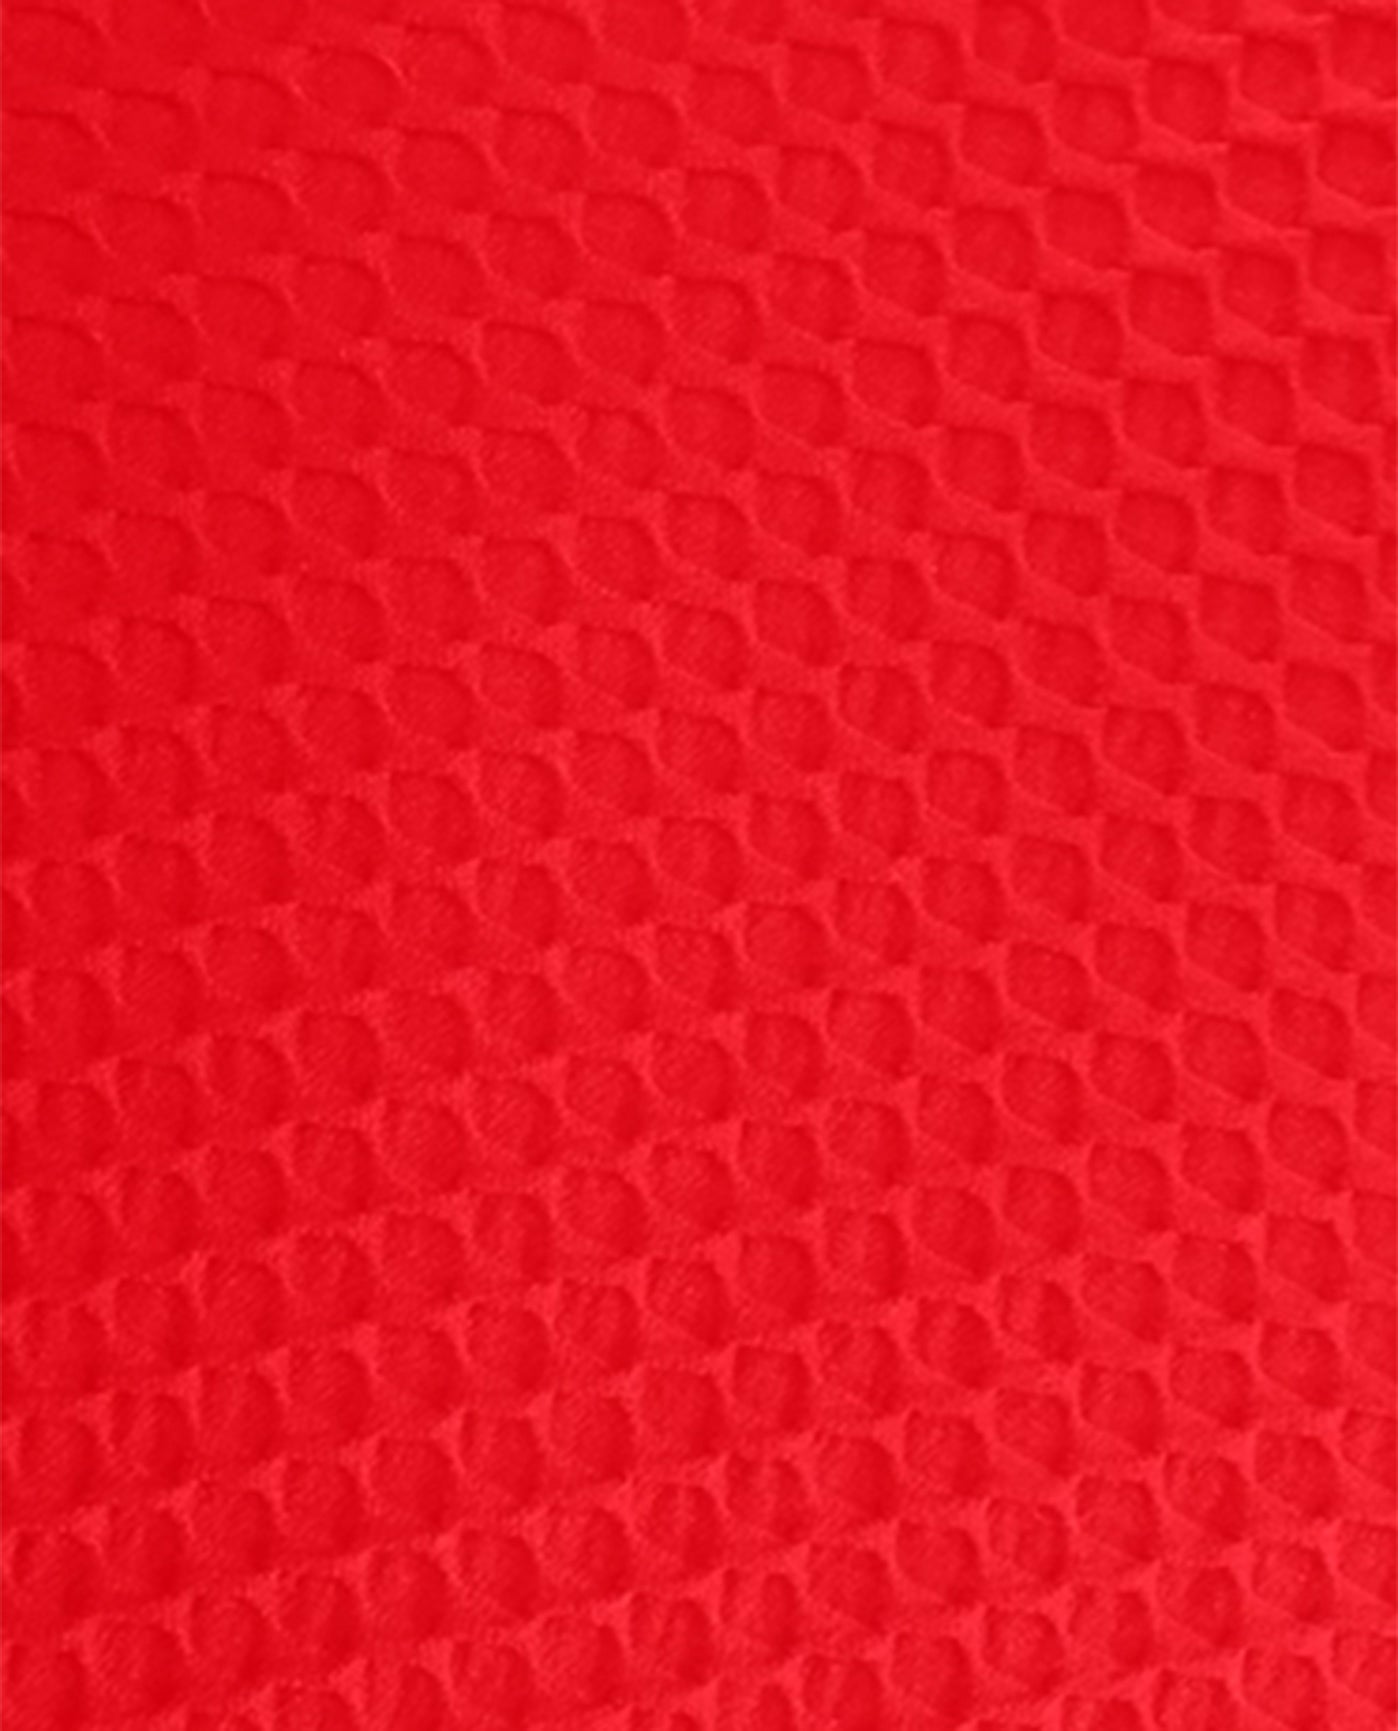 FABRIC SWATCH VIEW OF CHLORINE RESISTANT AQUAMORE COLOR BLOCK TEXTURED MOCK SURPLICE ONE PIECE SWIMSUIT | 616 AQT TEXTURED SCARLET